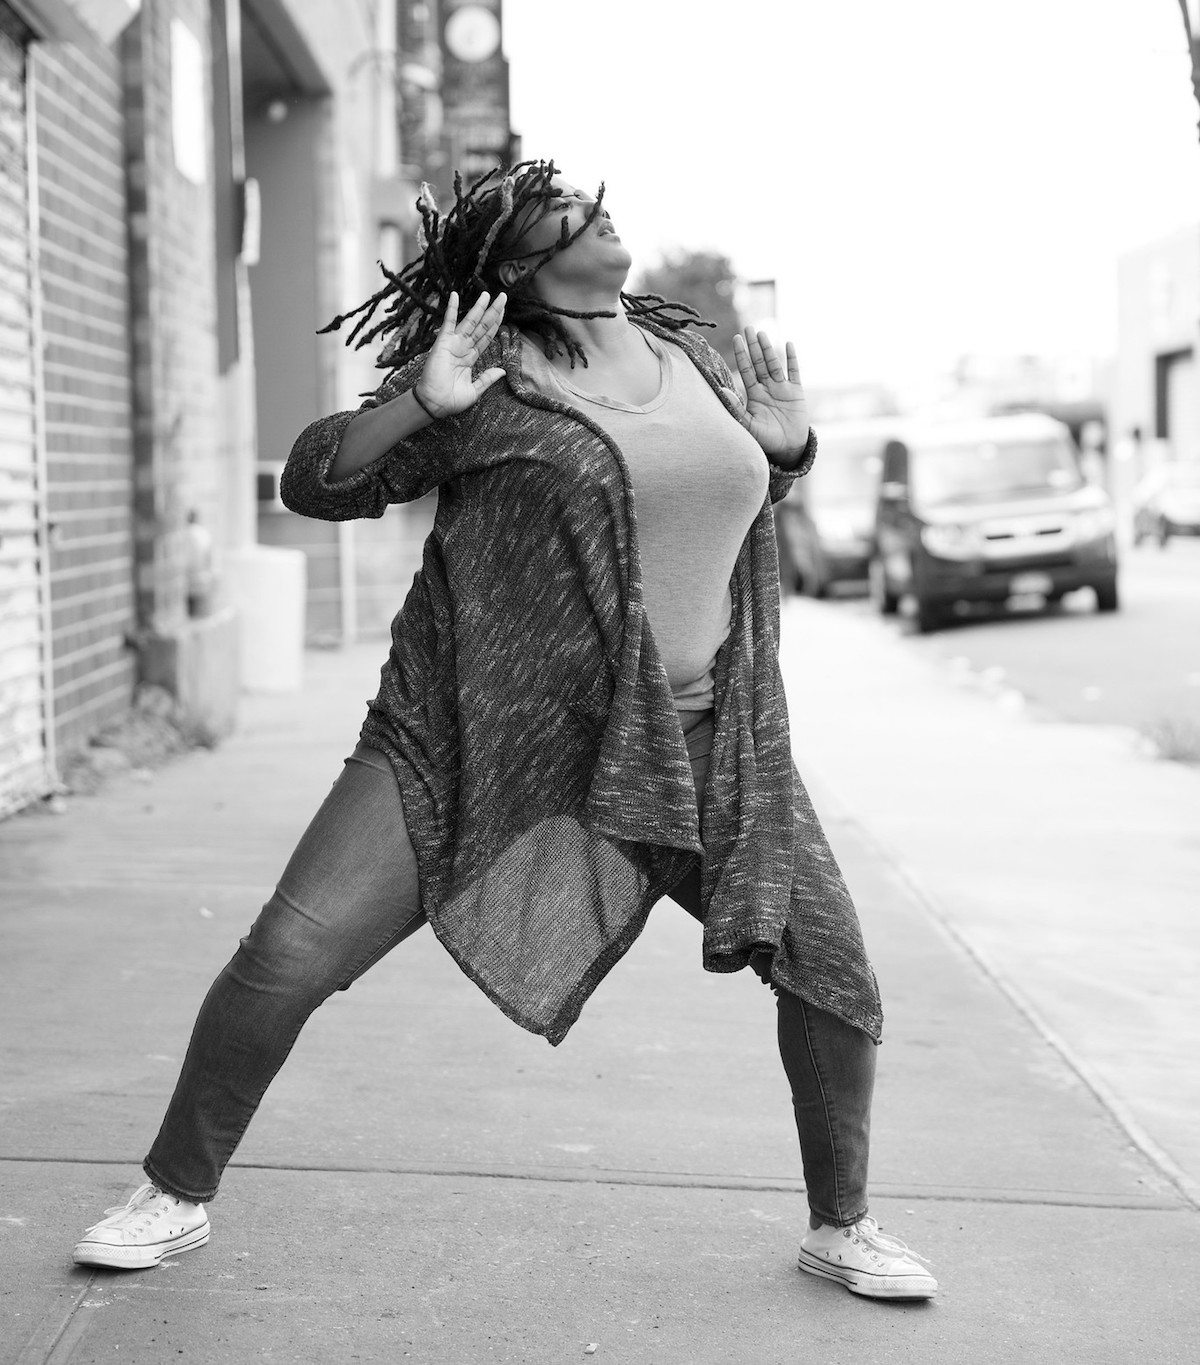 Black and white photo of a black woman dancing on the street.